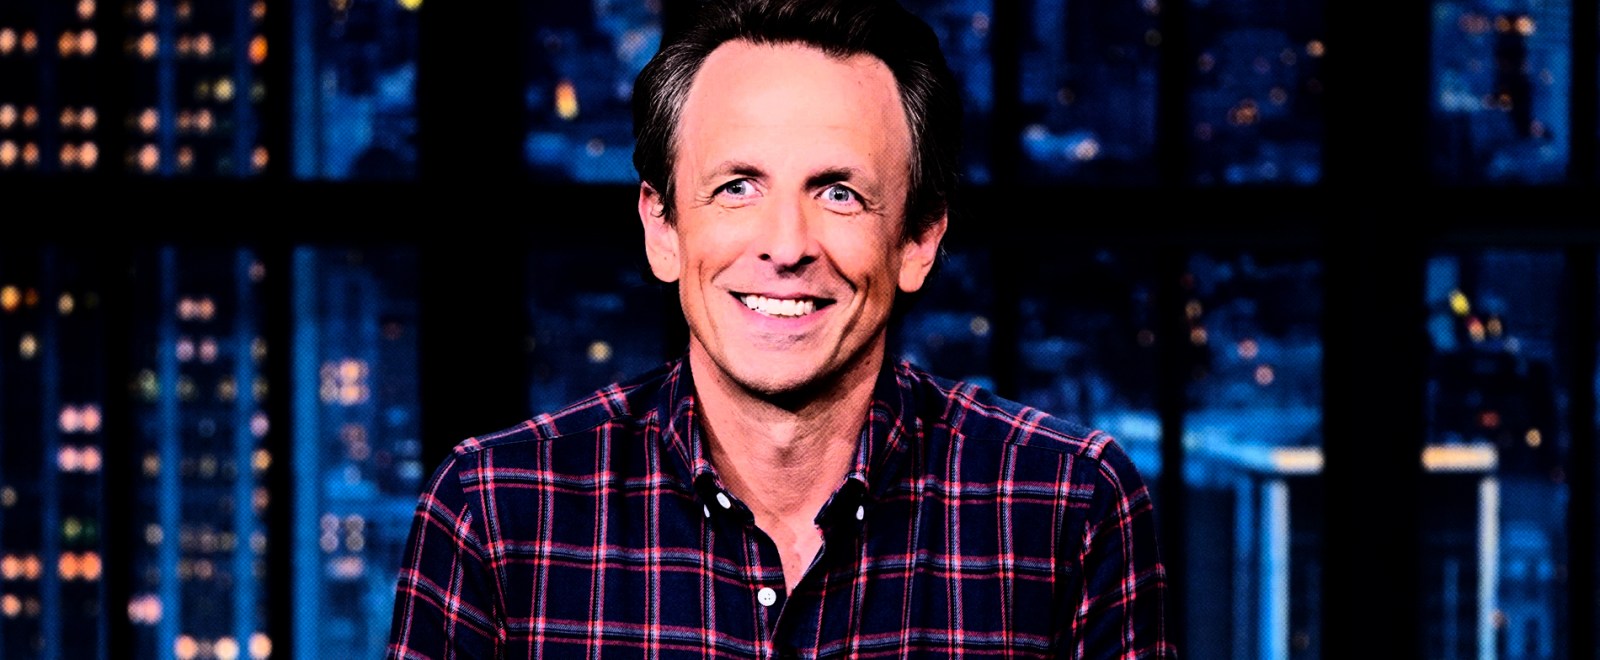 Seth Meyers Is Hosting The 'Late Night' He Wants, But Will He Keep It?